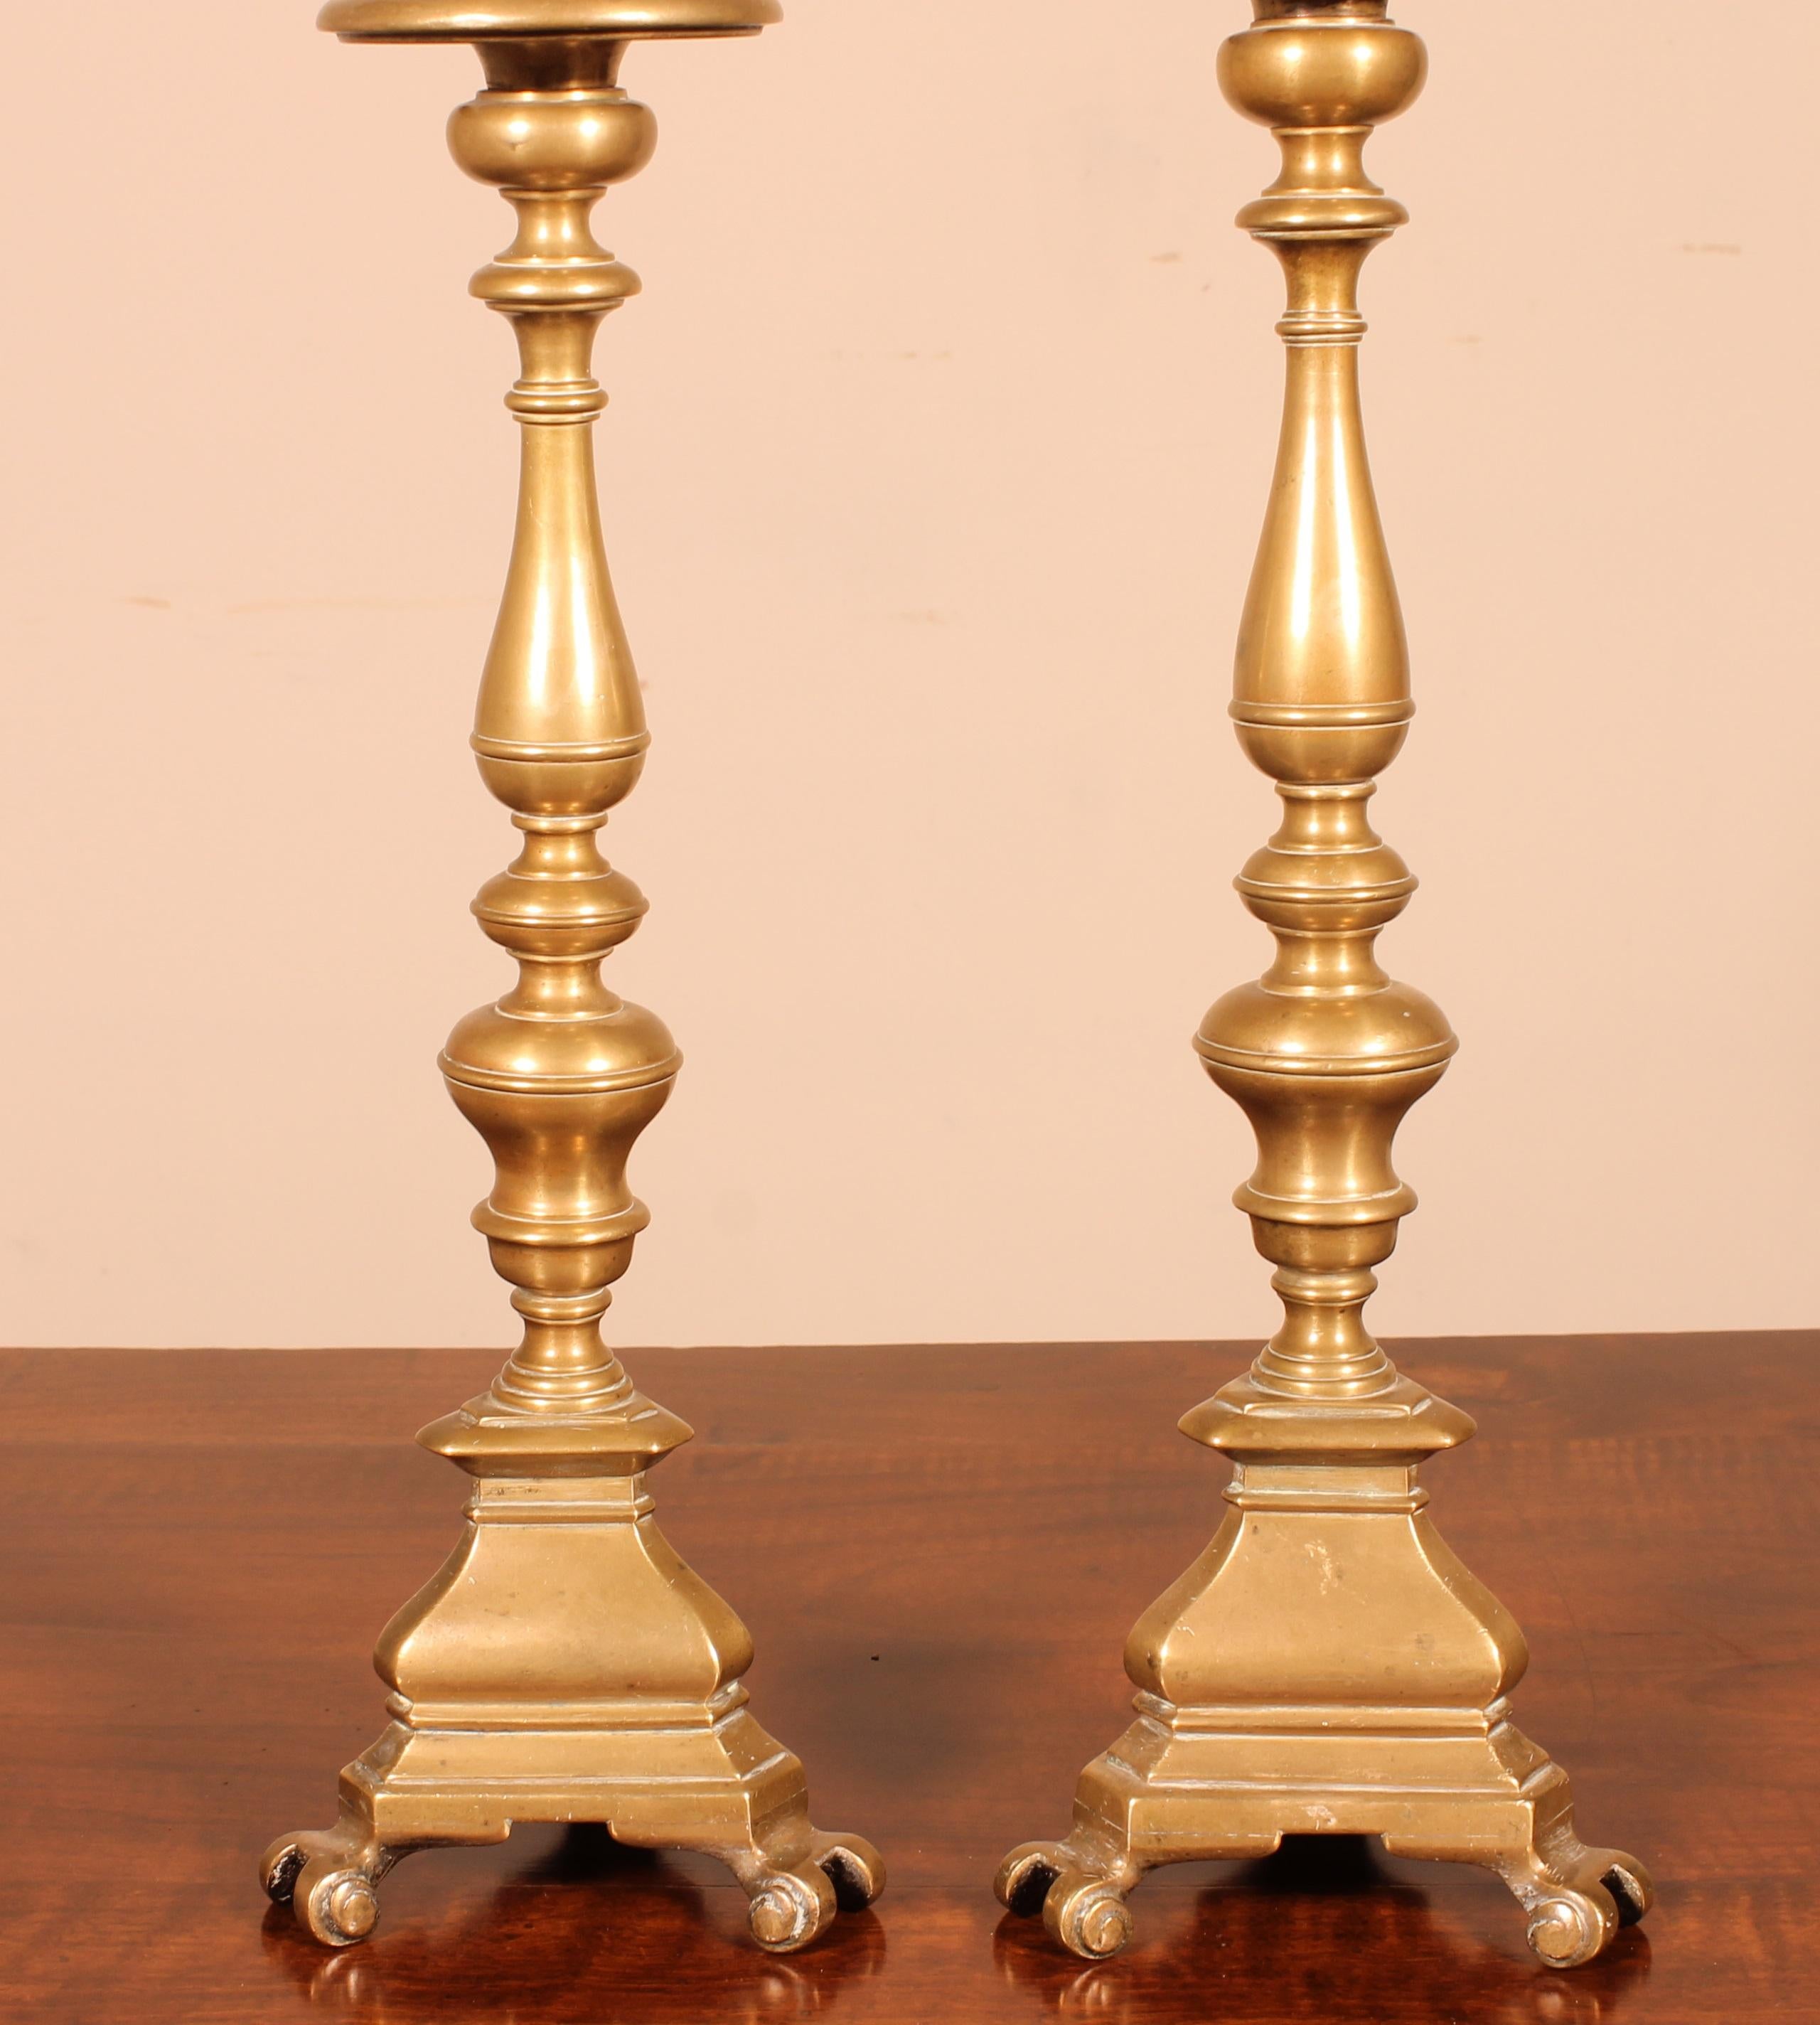 Elegant pair of small bronze candle sticks from the end of the 17th century
Beautiful turning and of good quality
Beautiful Italian candle stick with a height of 45cm
remark: small difference in heights (see pictures)

Delivery in Belgium,